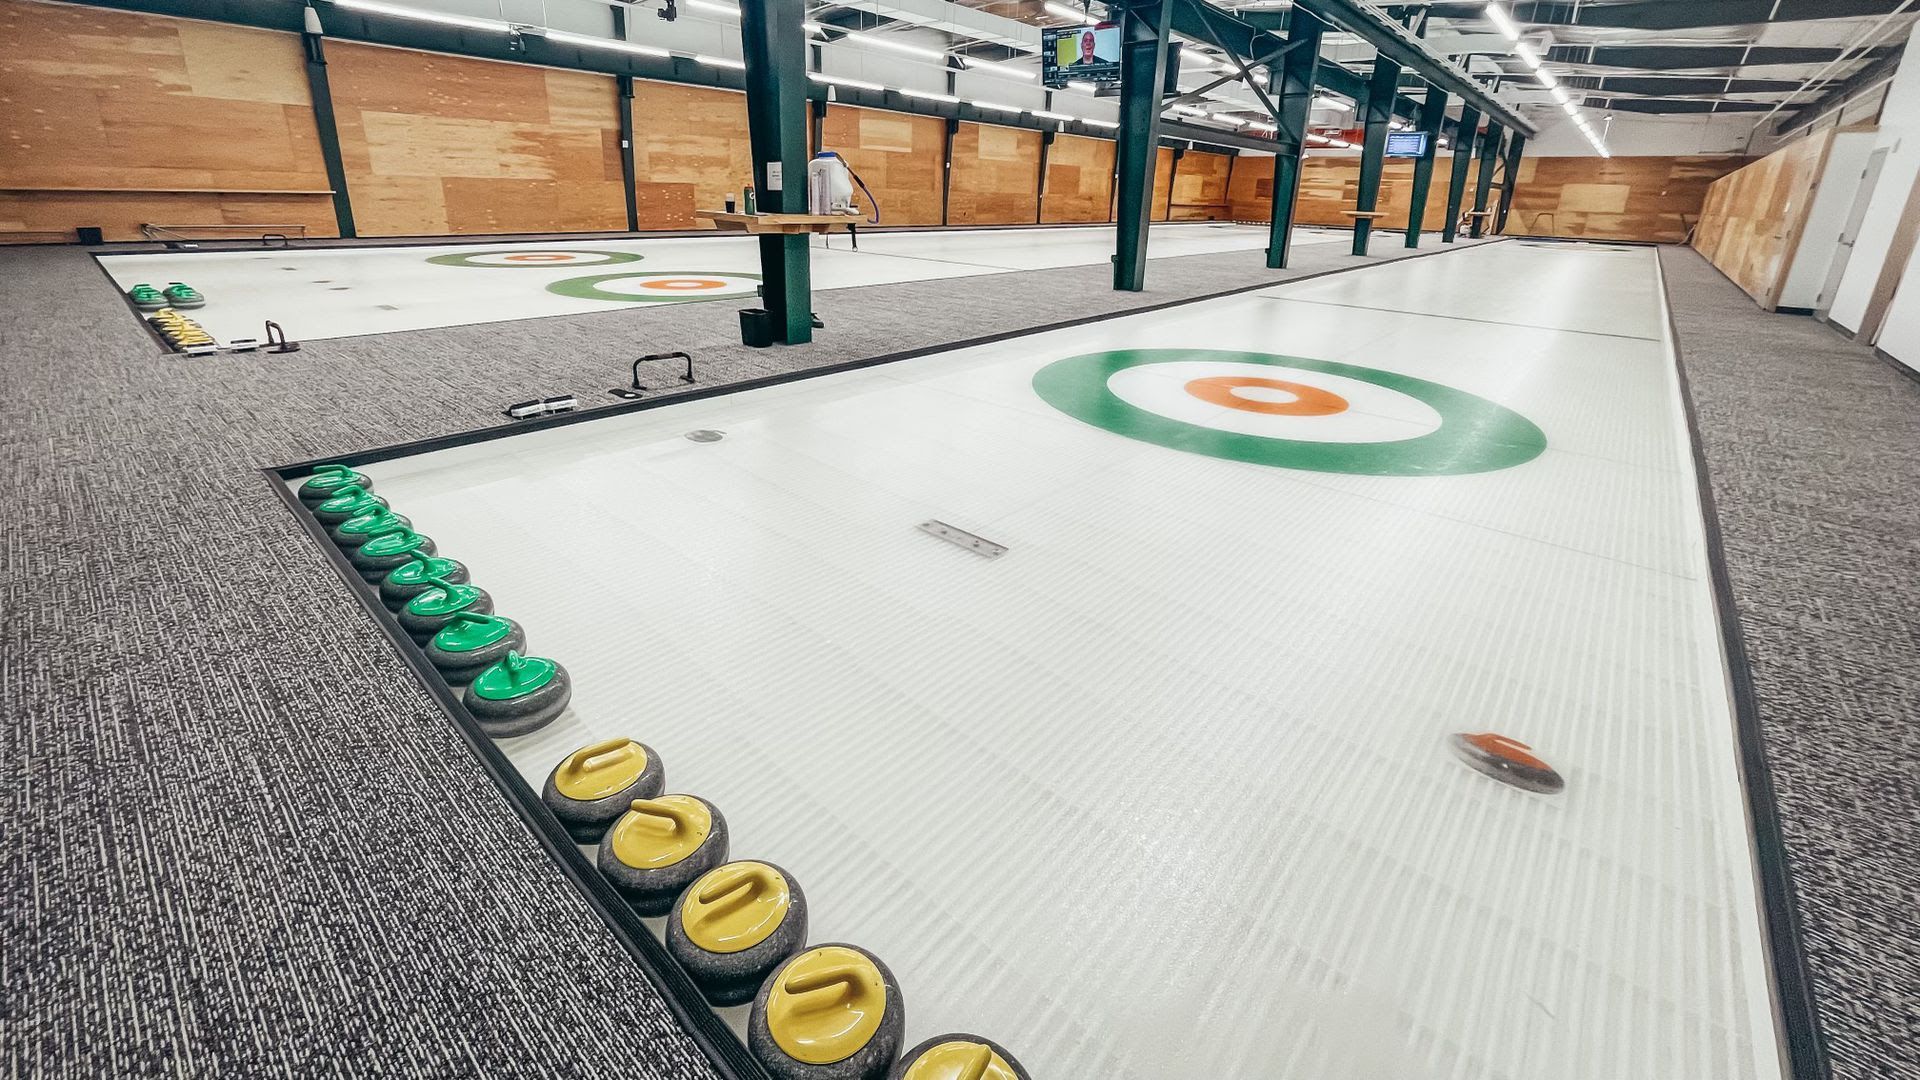 Curling space at the sports bar Tee Line. 